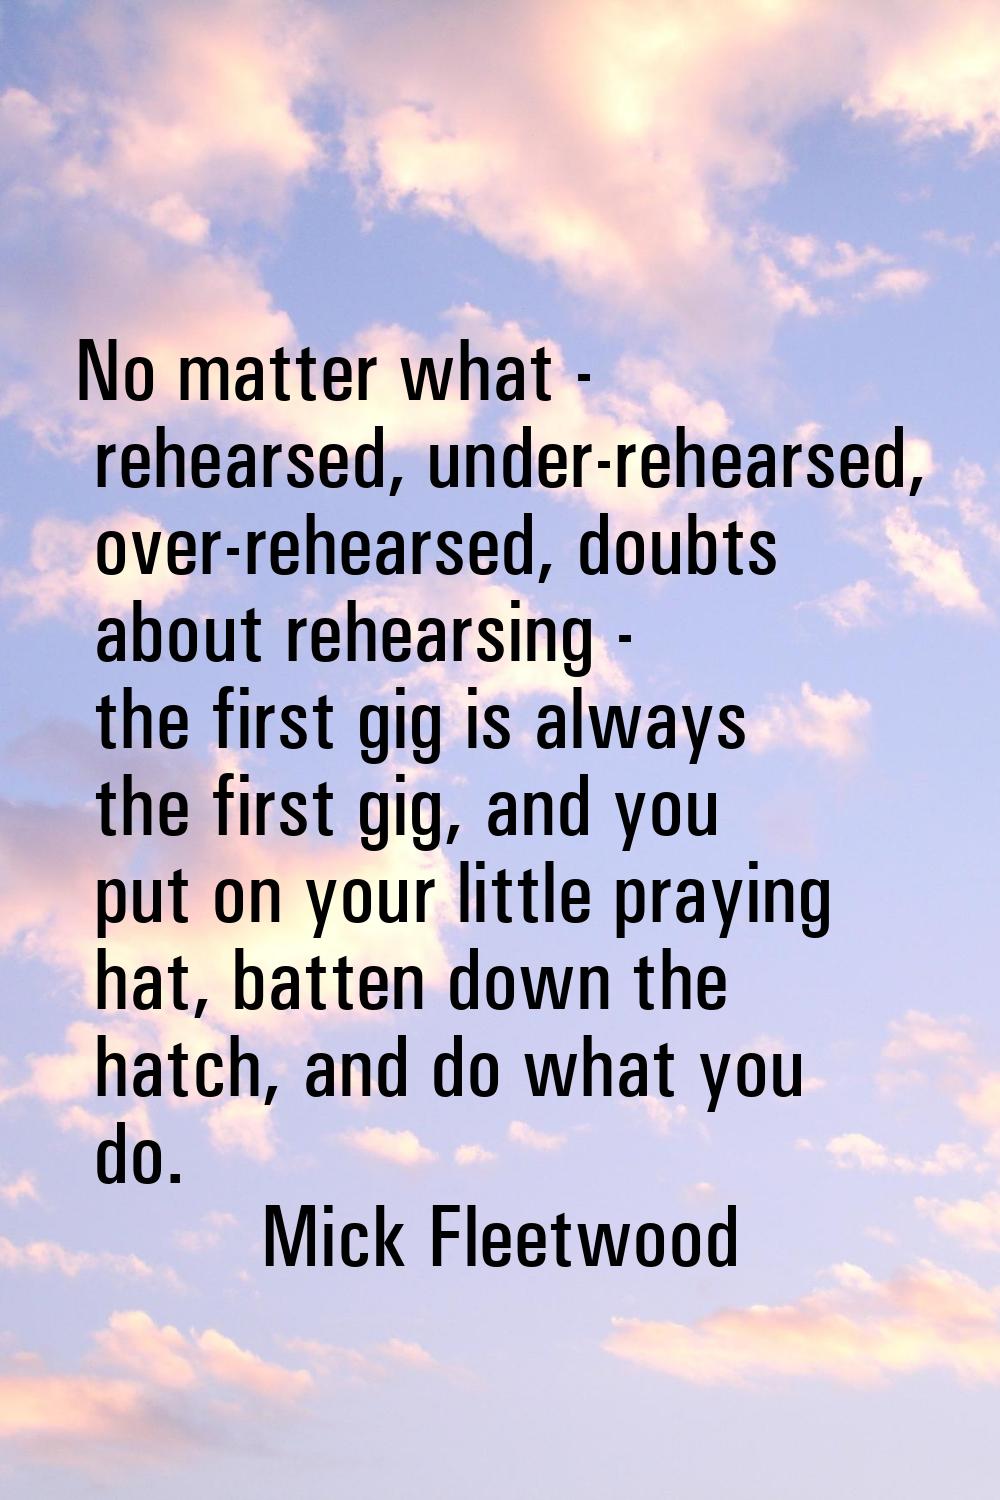 No matter what - rehearsed, under-rehearsed, over-rehearsed, doubts about rehearsing - the first gi